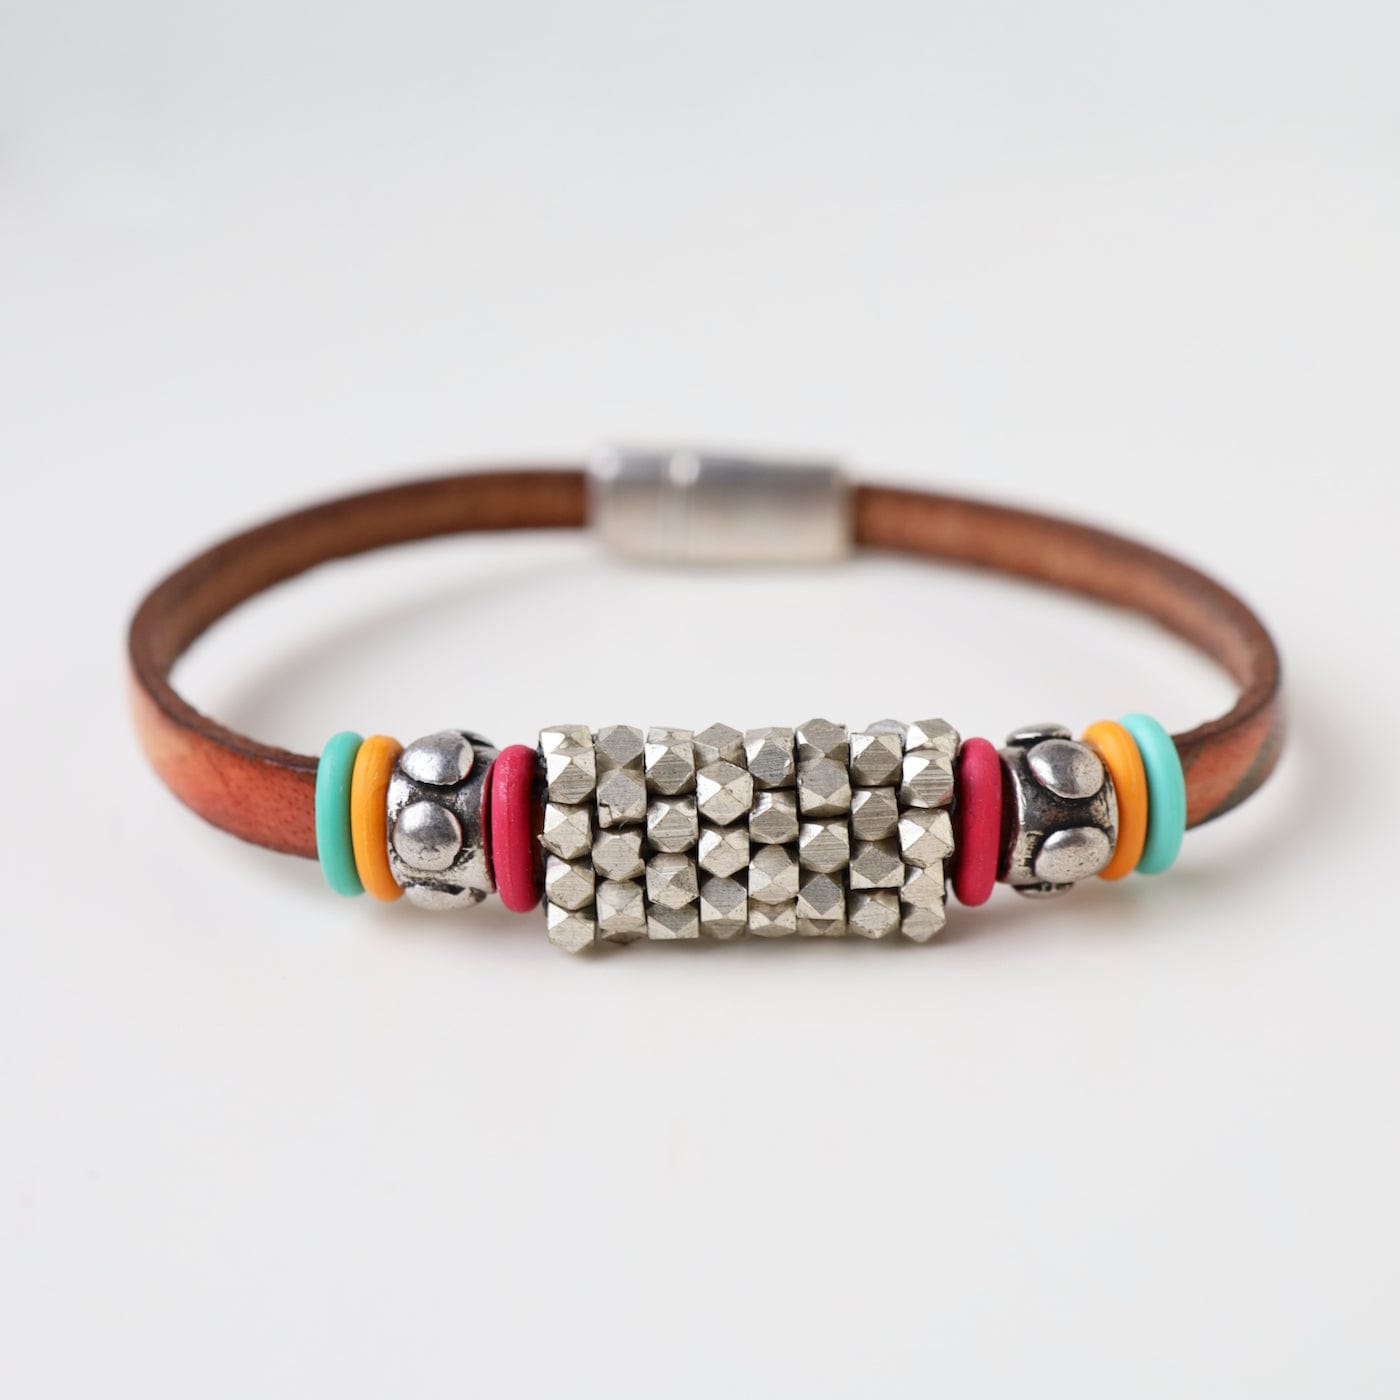 BRC-JM Hand Stitched Silver Cube Beads with Colored "O" Ring Bracelet